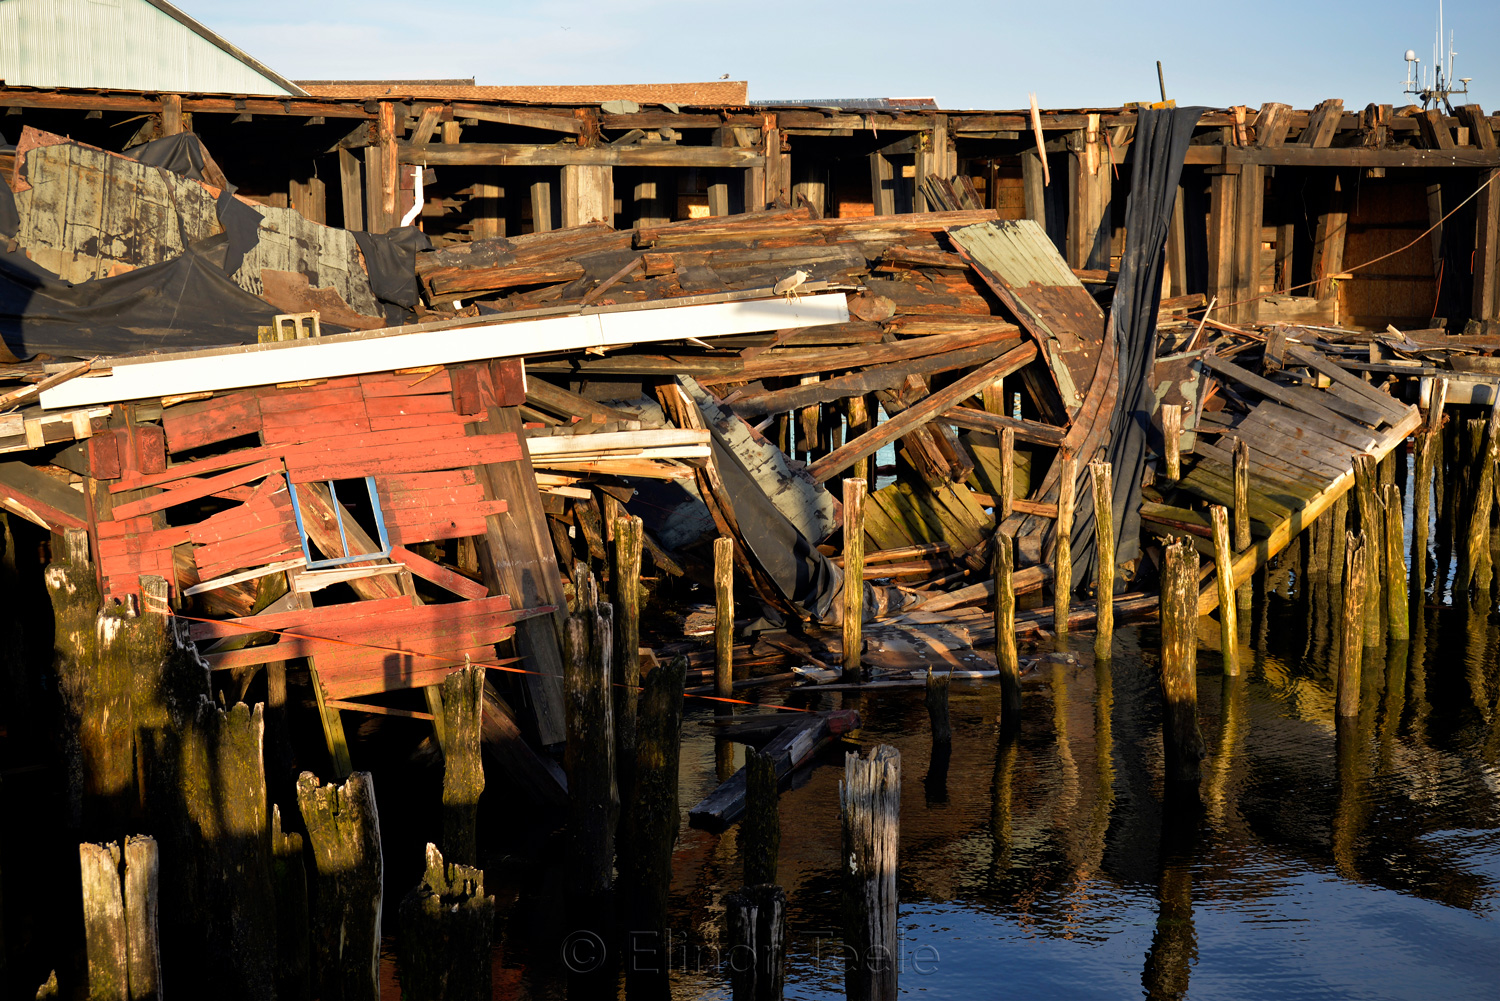 Gloucester Waterfront - Collapsed Warehouse 2